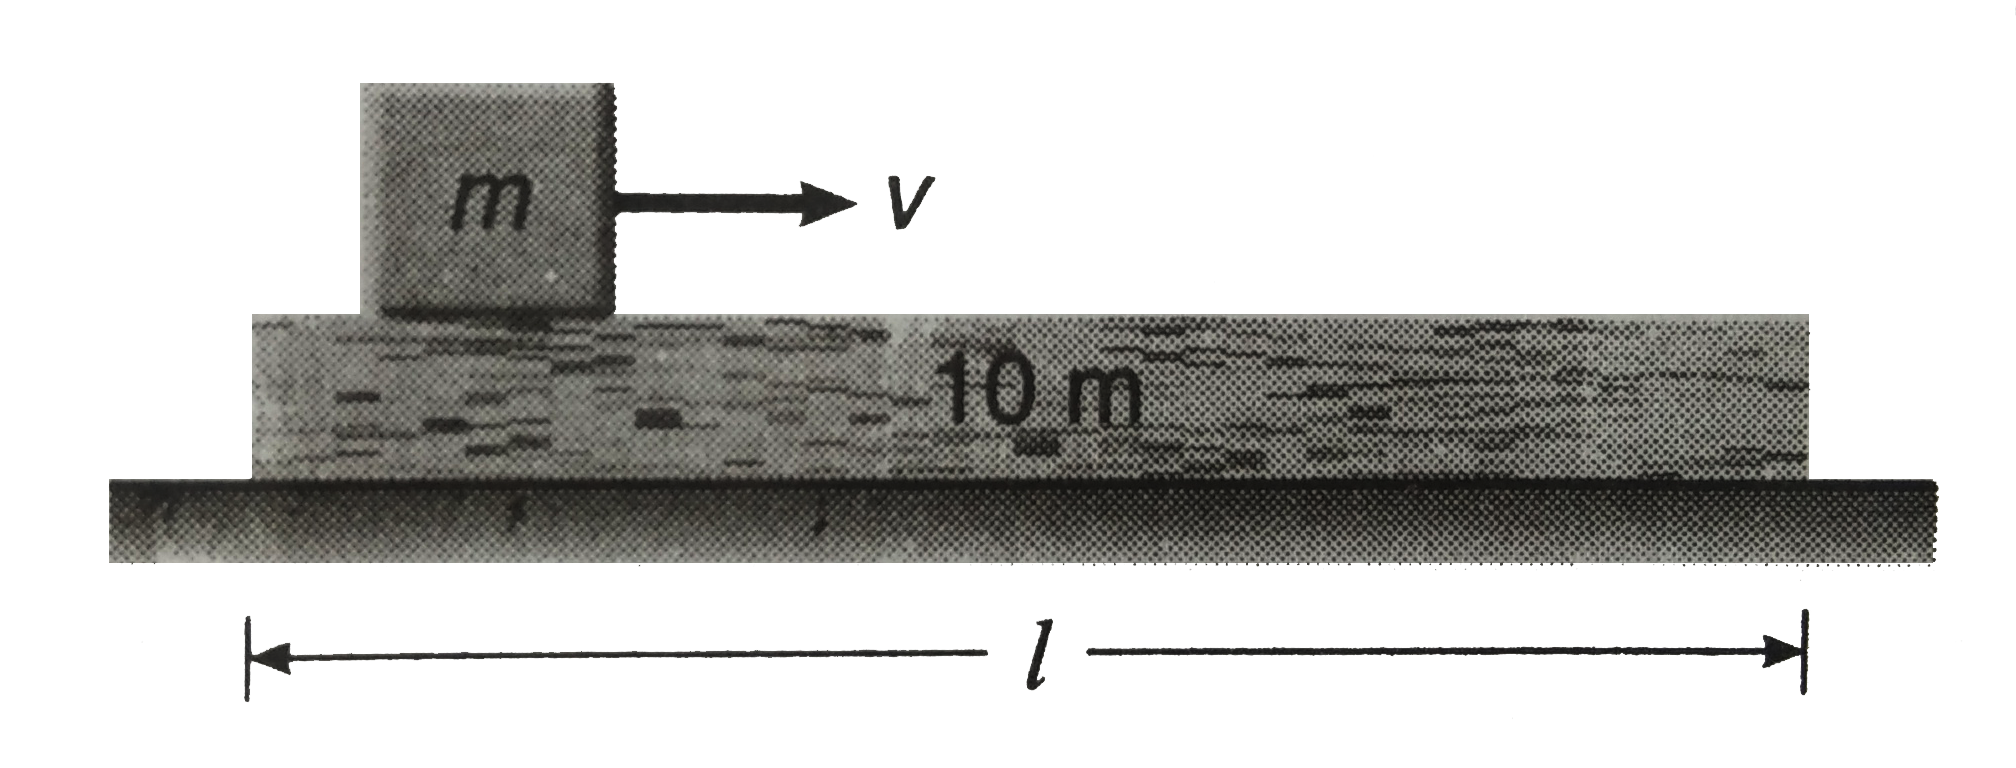 A small block of mass m is projected on a larger block of mass 10 m and length l with a velocity v as shown in the figure. The coefficient of friction between the two block is mu(2) while that between the lower block and the ground is mu(1). Given that mu(2) gt 11 mu(1).      (a) Find the minimum value of v, such that the mass m falls off the block of mass 10 m .   (b) If v has  minimum value, find the time taken by block m to do so.